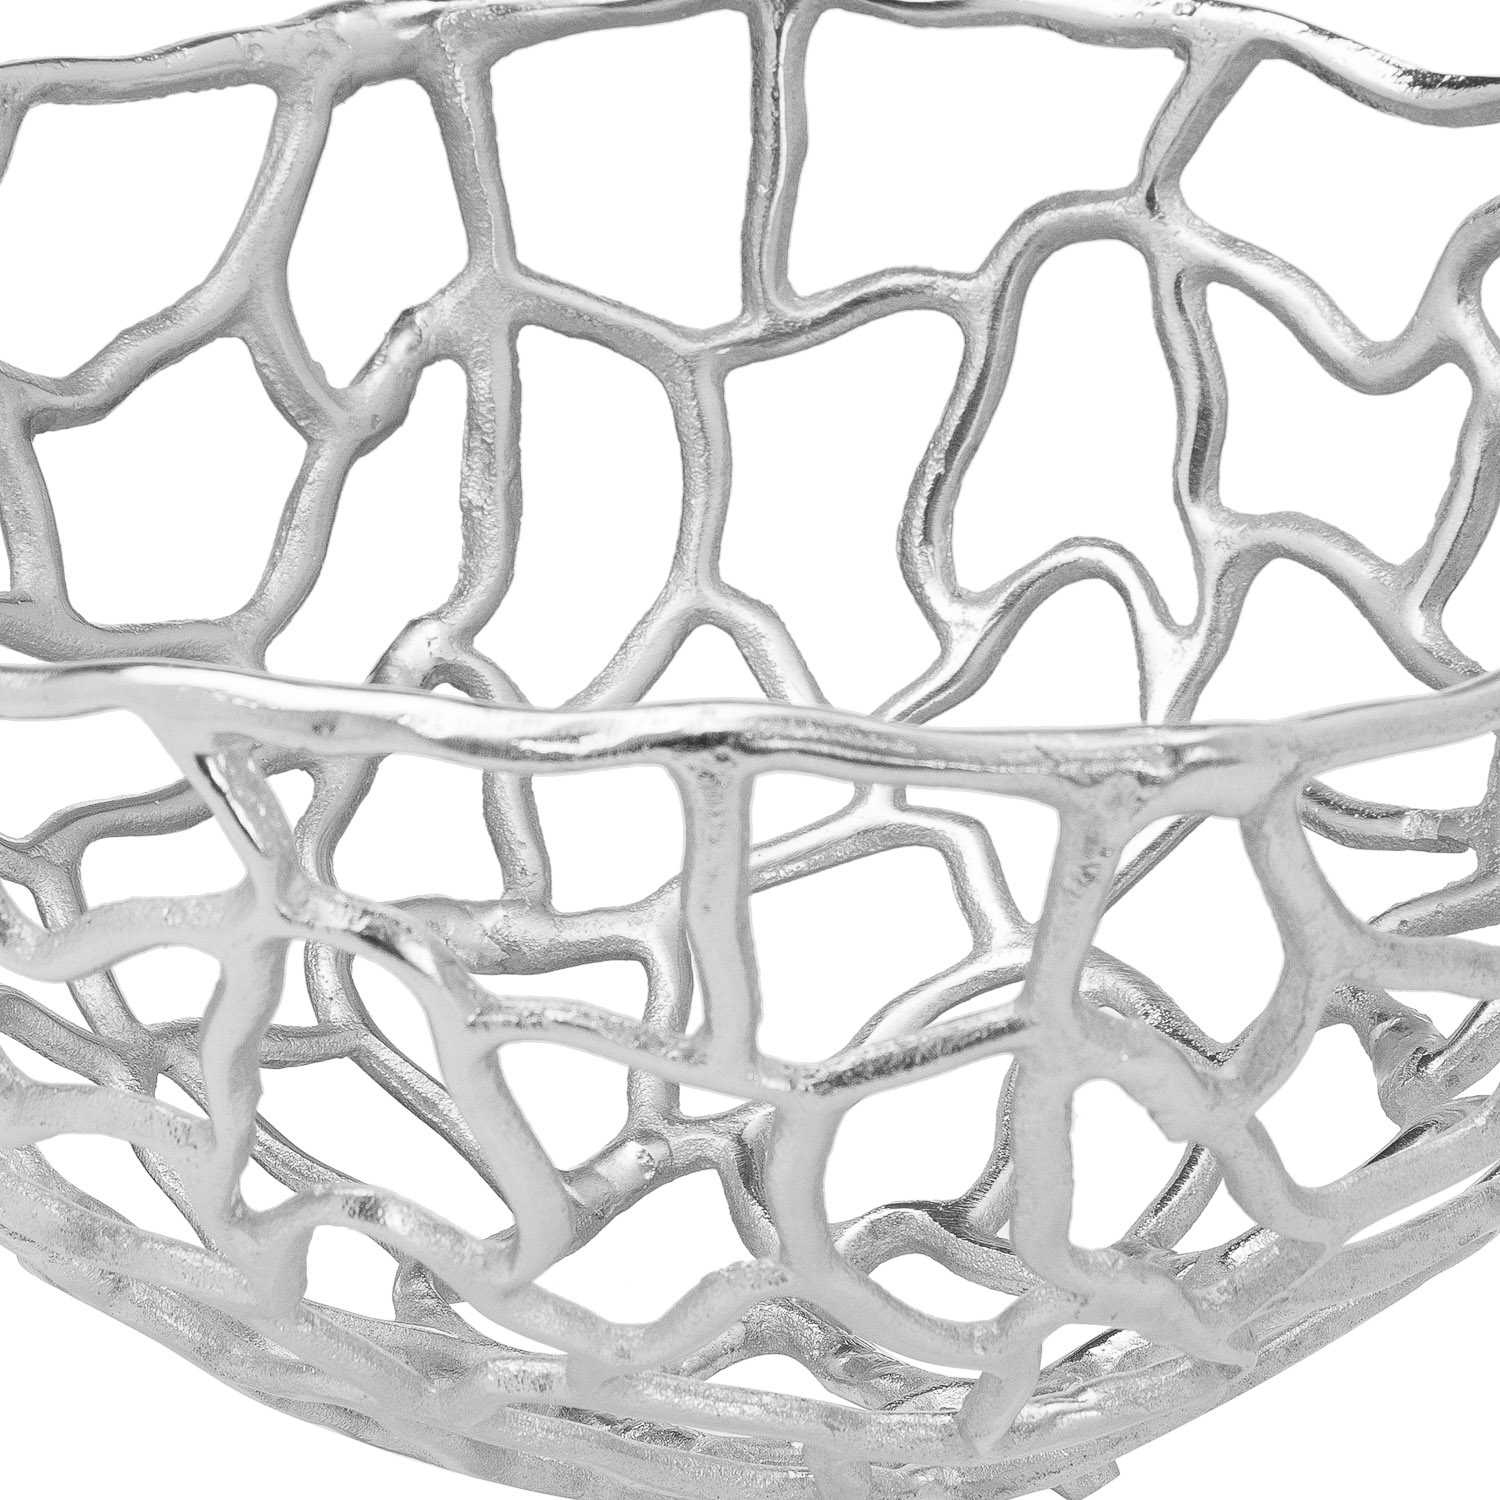 Ohlson Silver Perforated Coral inspired Bowl Large - Image 2